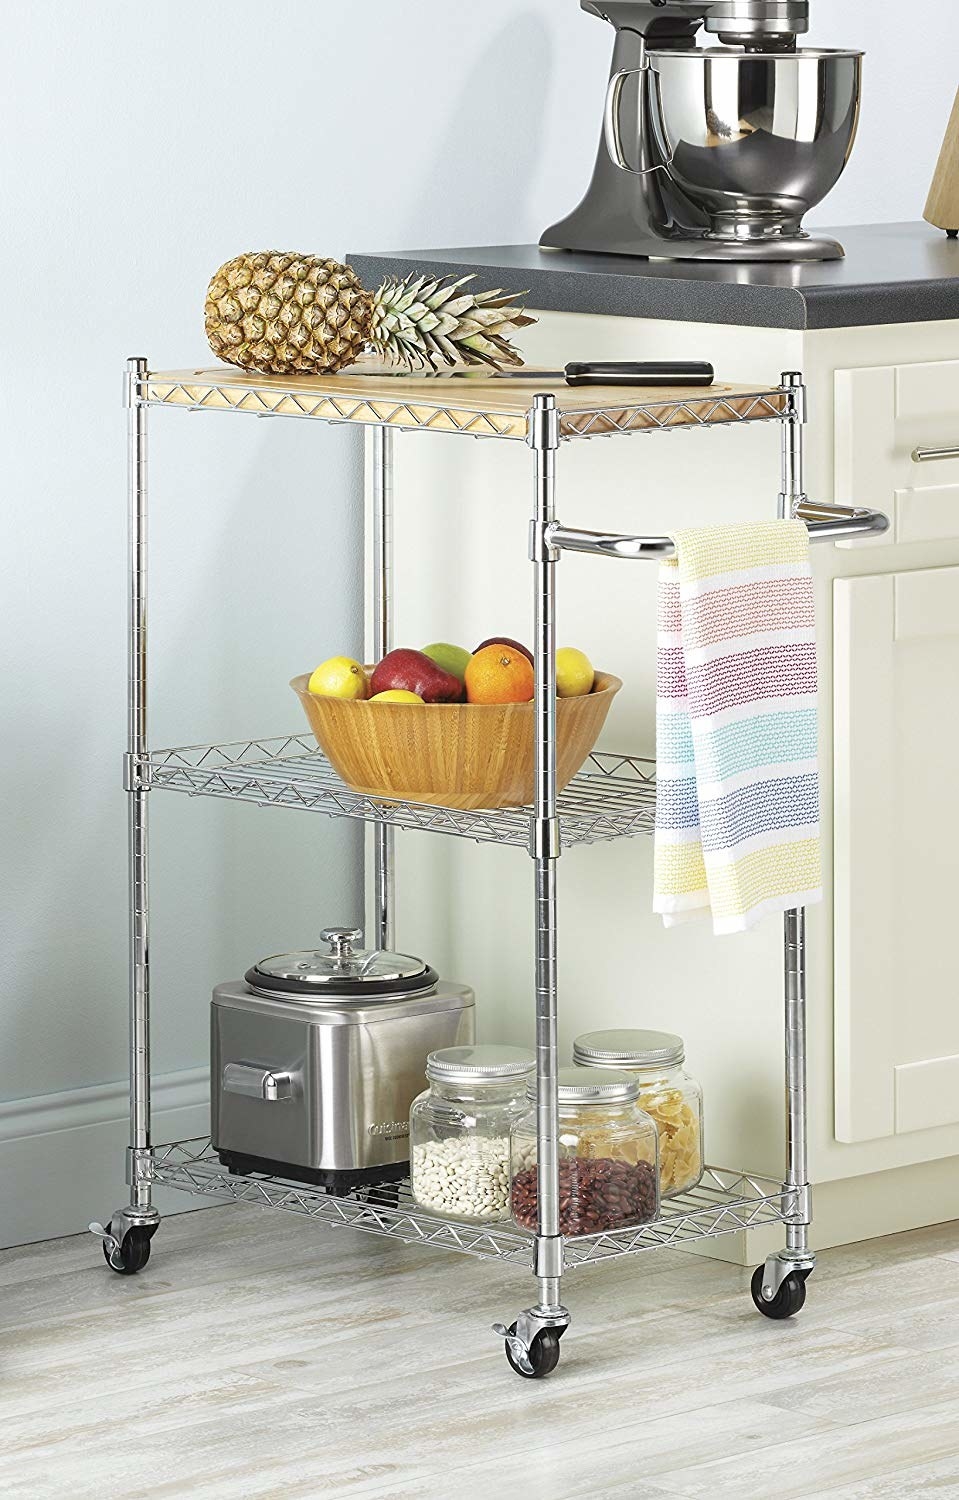 The silver metal three-tier kitchen cart with a wood cutting board on top and assorted kitchen products on it